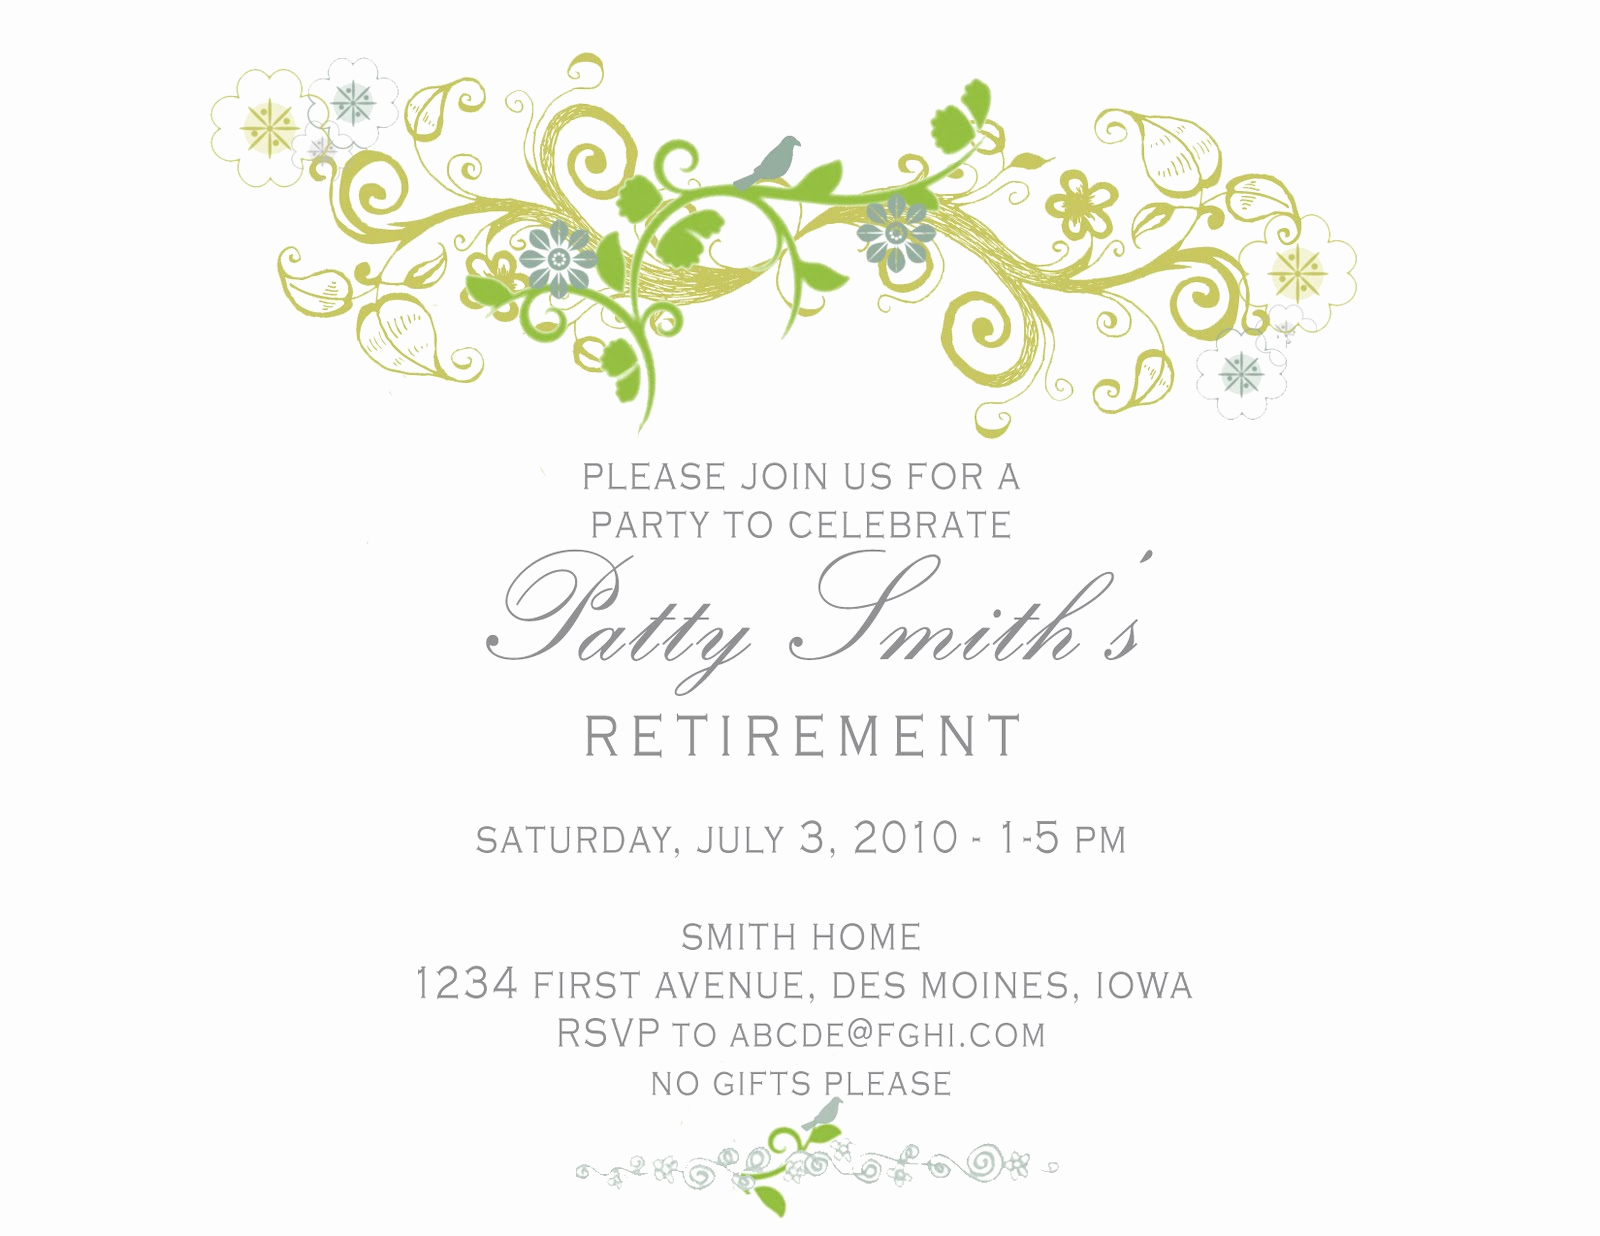 Retirement Party Invitations Templates Best Of Idesign A Retirement Party Invitation